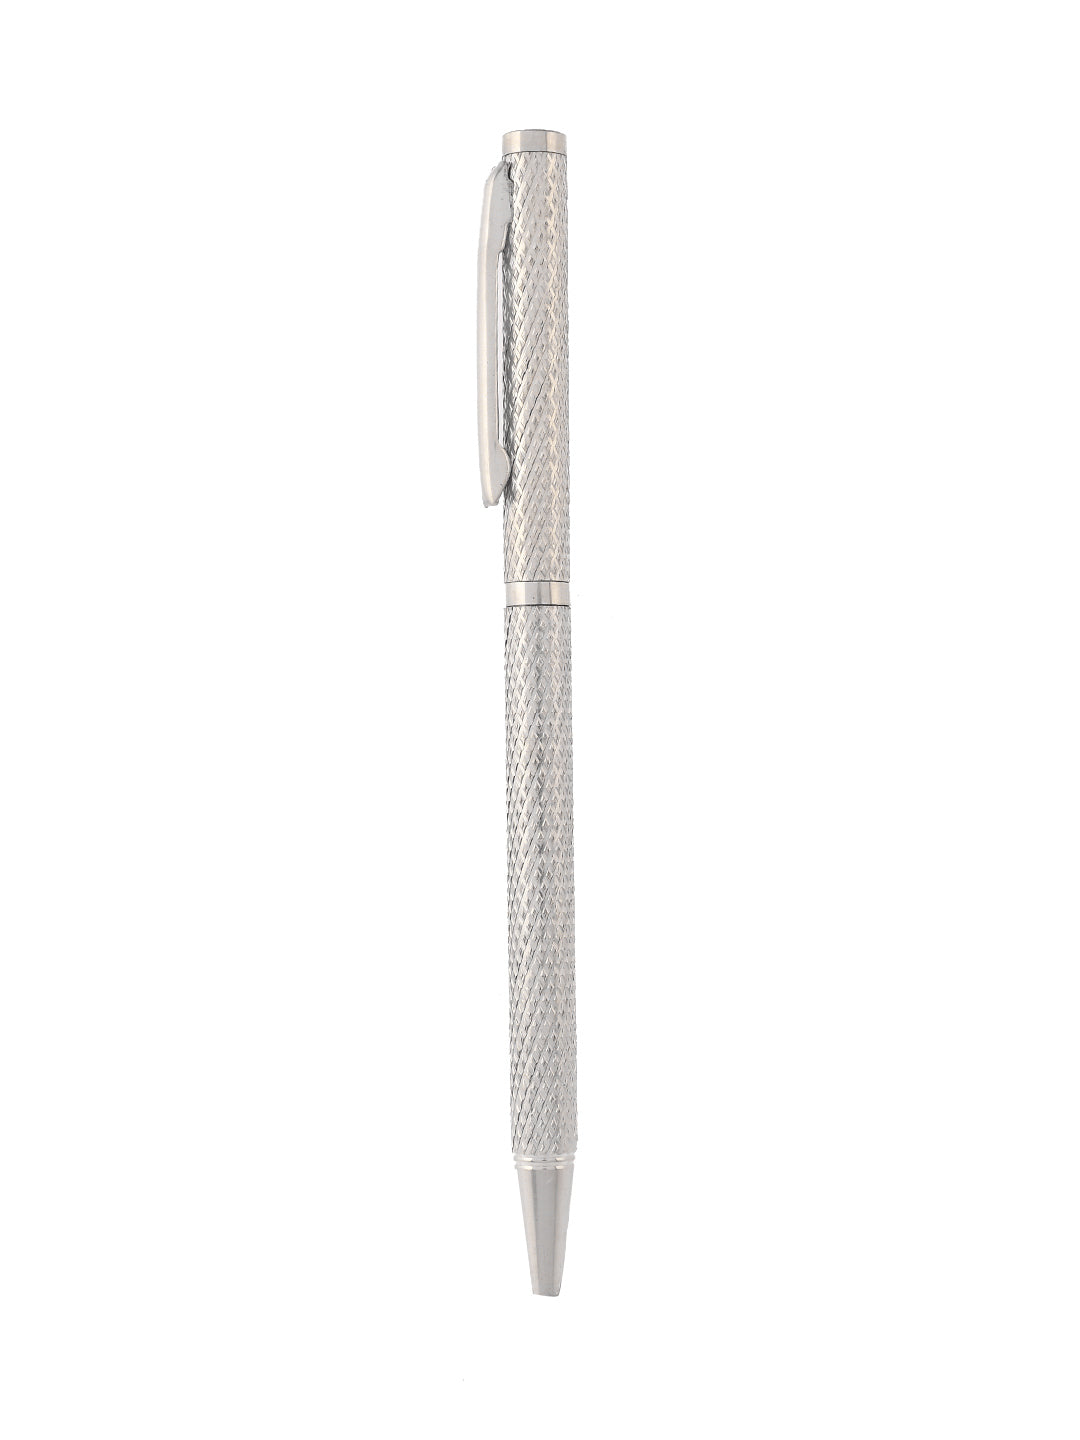 999 Sterling Silver Pen for Gifting/Office